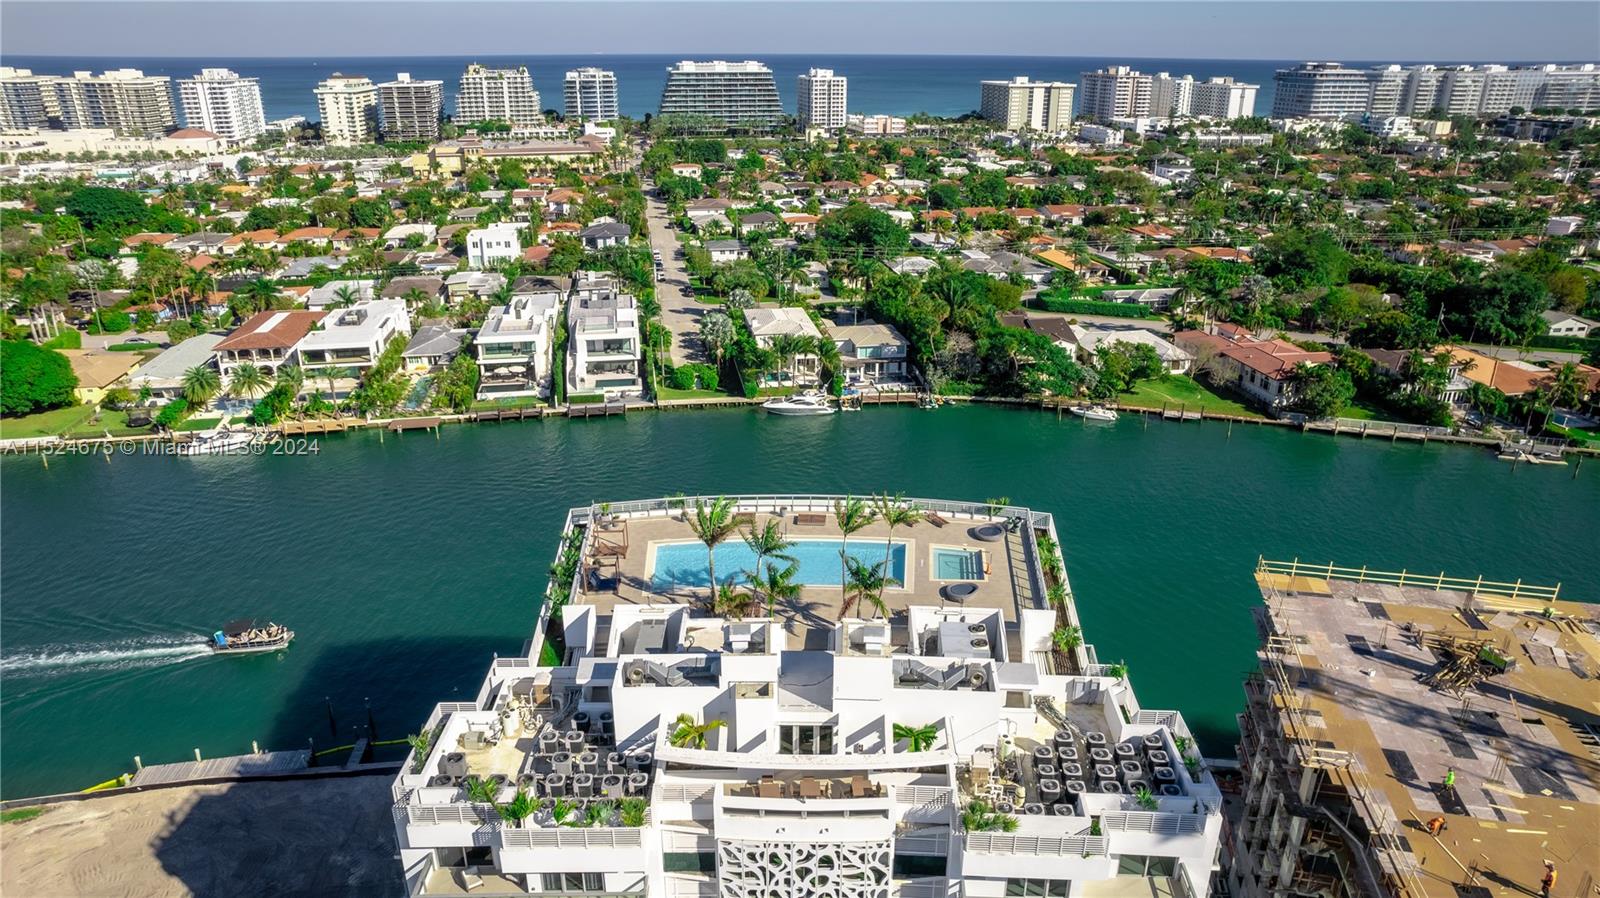 RARE OPPORTUNITY! Luxury fully furnished unit with side water view in the prestigious Bay Harbor Islands. This TURN-KEY RESIDENCE is fully equipped, featuring modern furniture, premium wood tile, and several upgrades. Enjoy a ROOFTOP POOL WITH STUNNING VIEWS. The 2-bed + large den (converted to a 3rd bed) offers 1,305 sqft of living area and nearly 400 sqft of balconies. Situated in ONE OF THE MOST SOUGHT-AFTER AREAS in Greater Miami, very close to Indian Creek, A-rated schools, and just minutes from the beach, Bal Harbour Shops, and trendy restaurants. Includes 2 ASSIGNED PARKING SPACES (a rarity on the island) and storage. New ultra-luxury building (La Baia) under construction on south lot, adding GREAT VALUE to the area. Don't miss out!